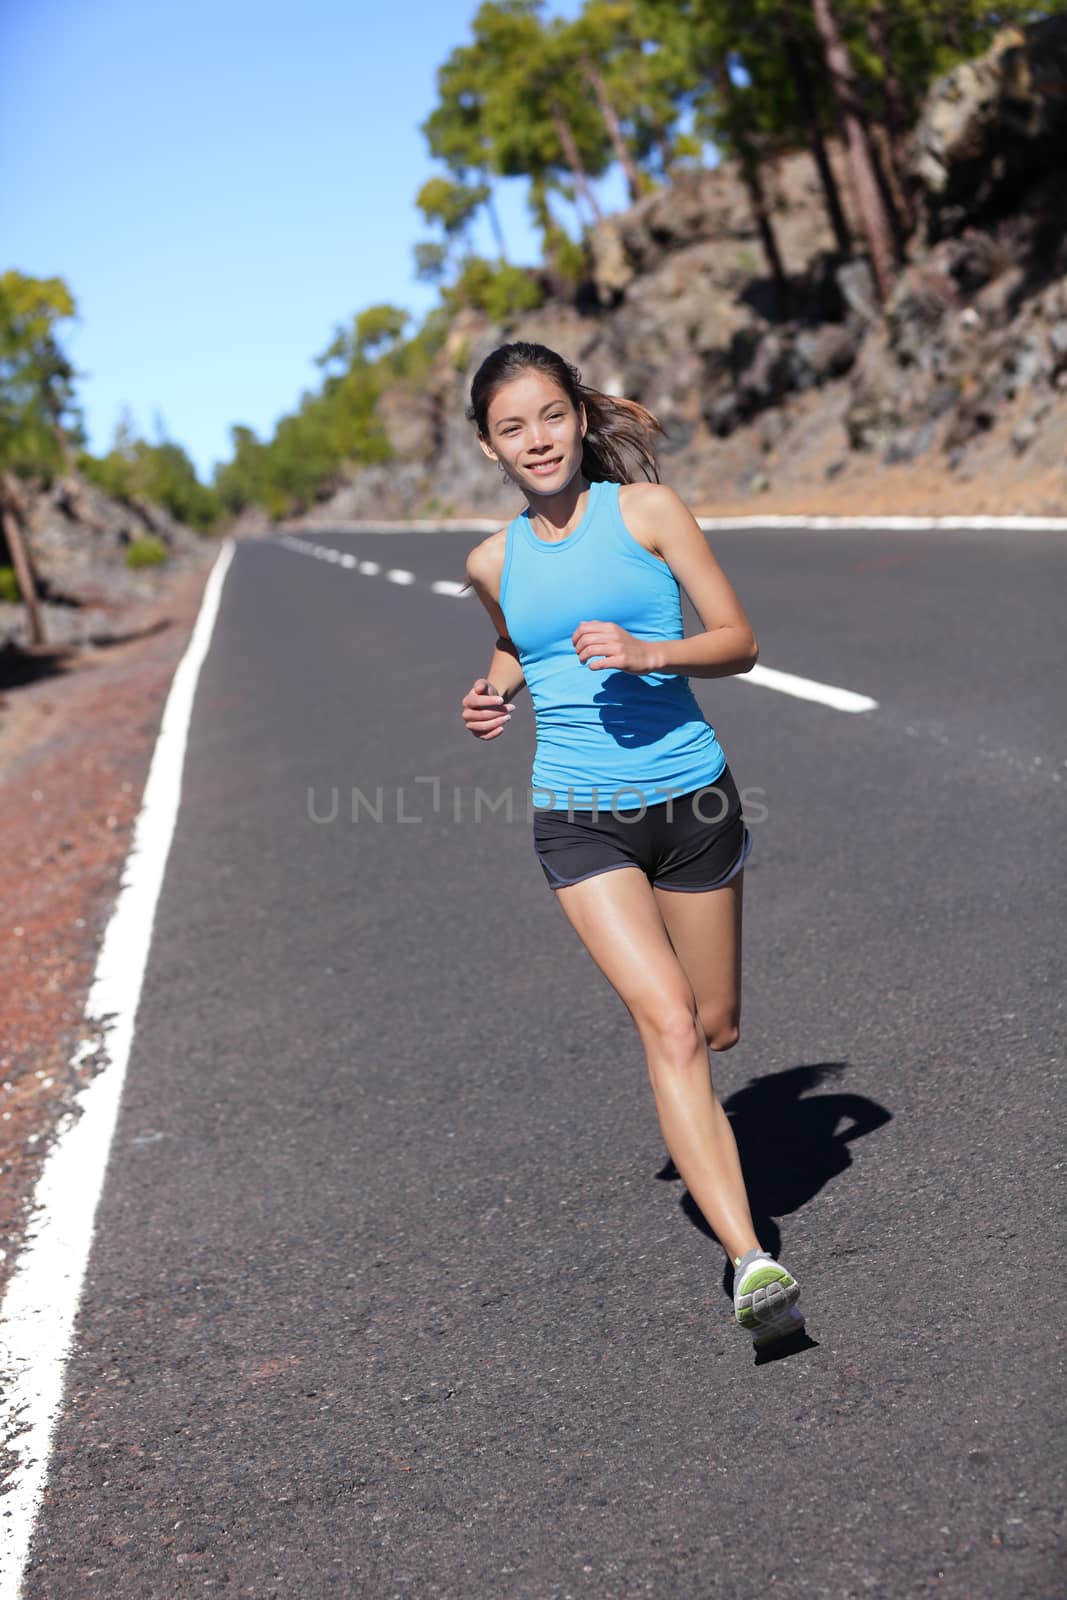 Female road runner training running in outdoor nature. Asian woman jogging fast working out her cardio in blue top and black shorts activewear.